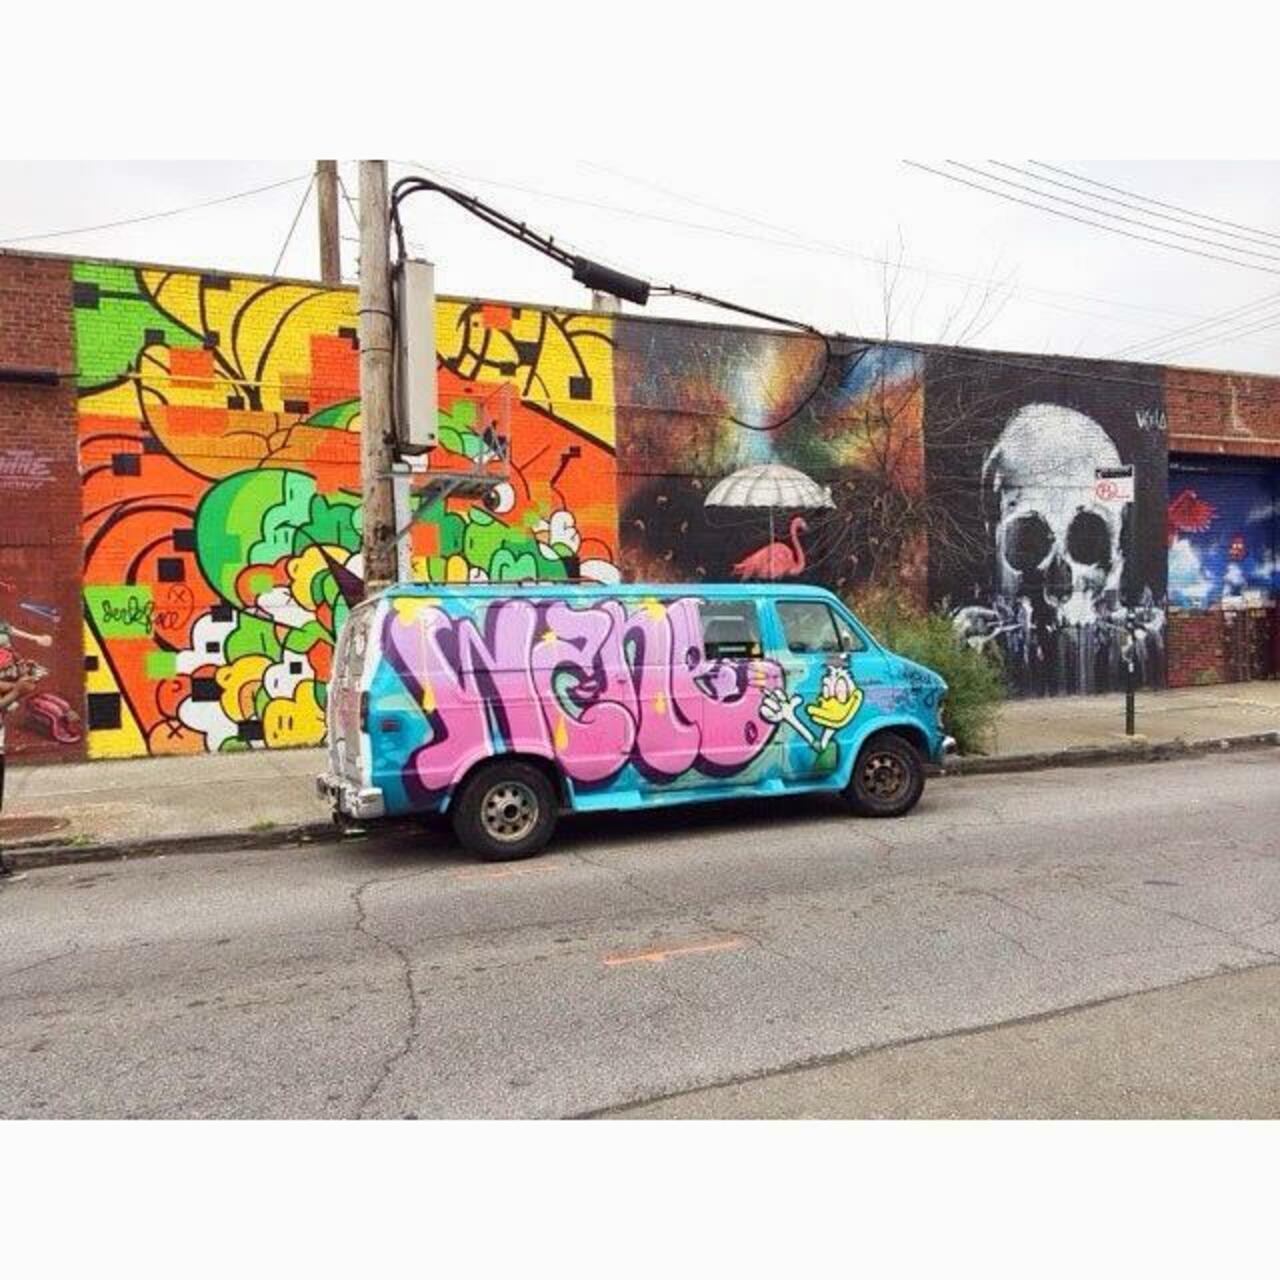 I saw this van in #brooklyn . Does anyone know of the #artist ? #streetart #graffiti http://t.co/7AiJVX2cb1